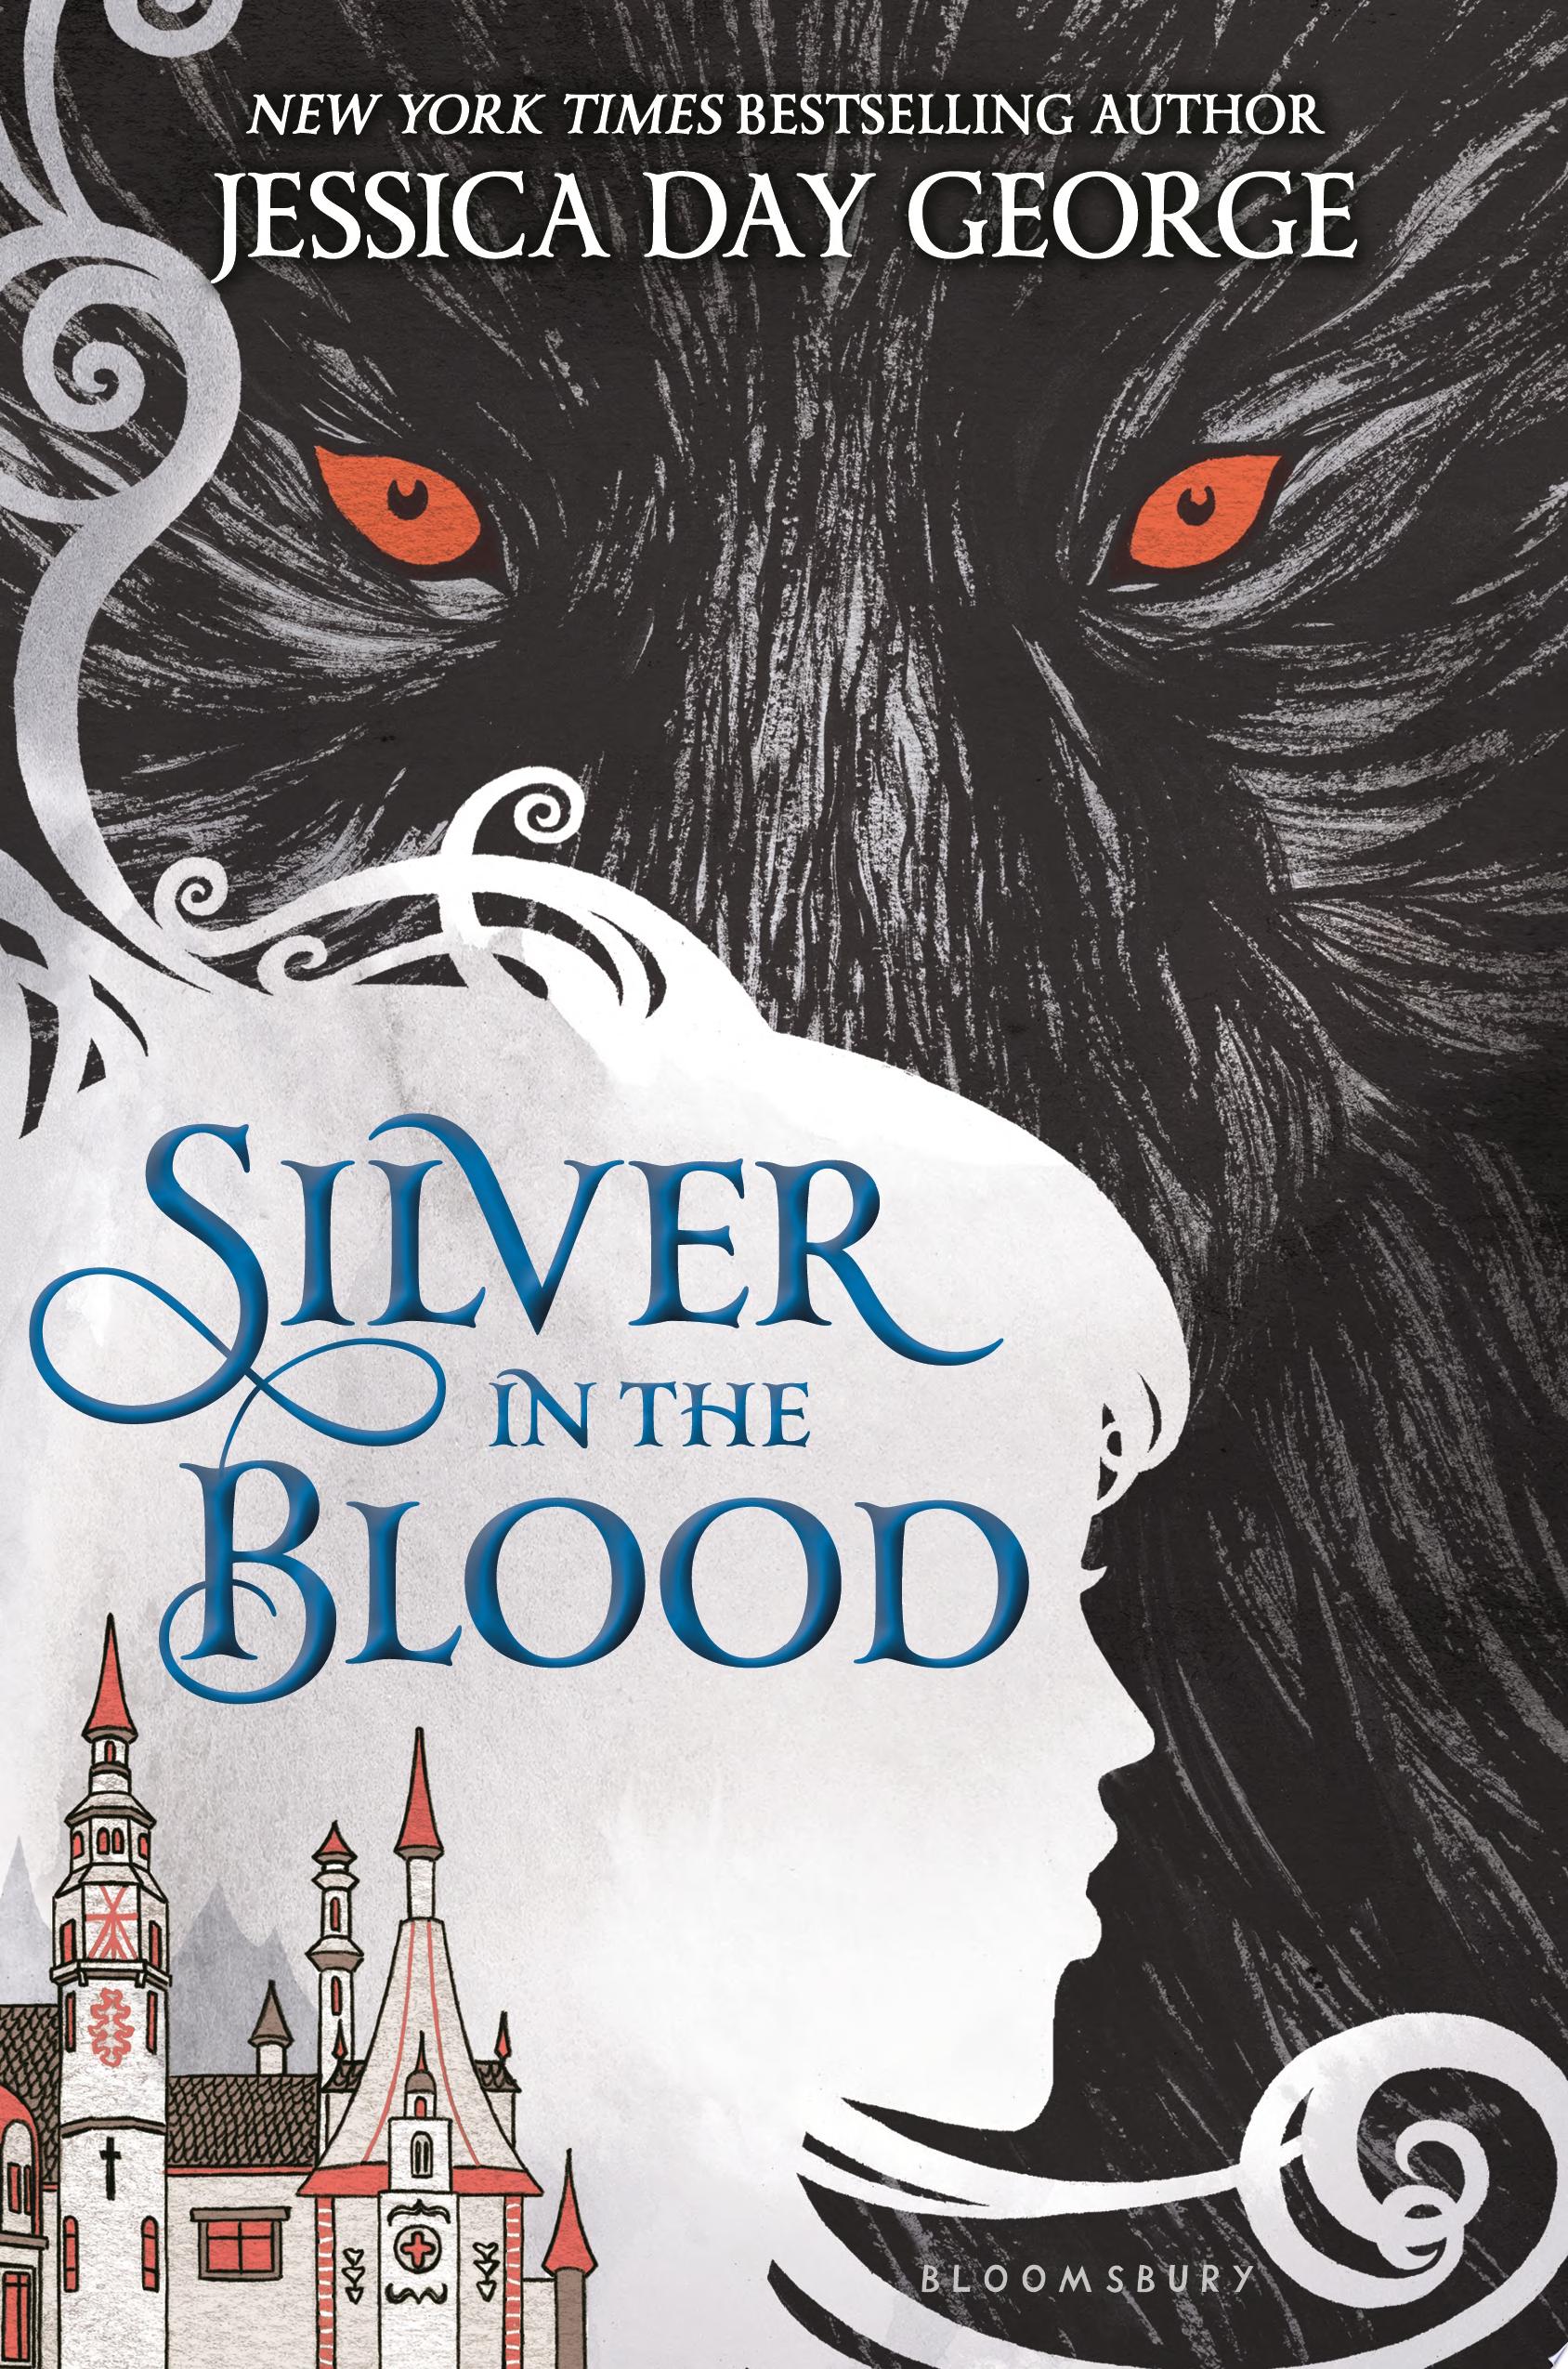 Image for "Silver in the Blood"